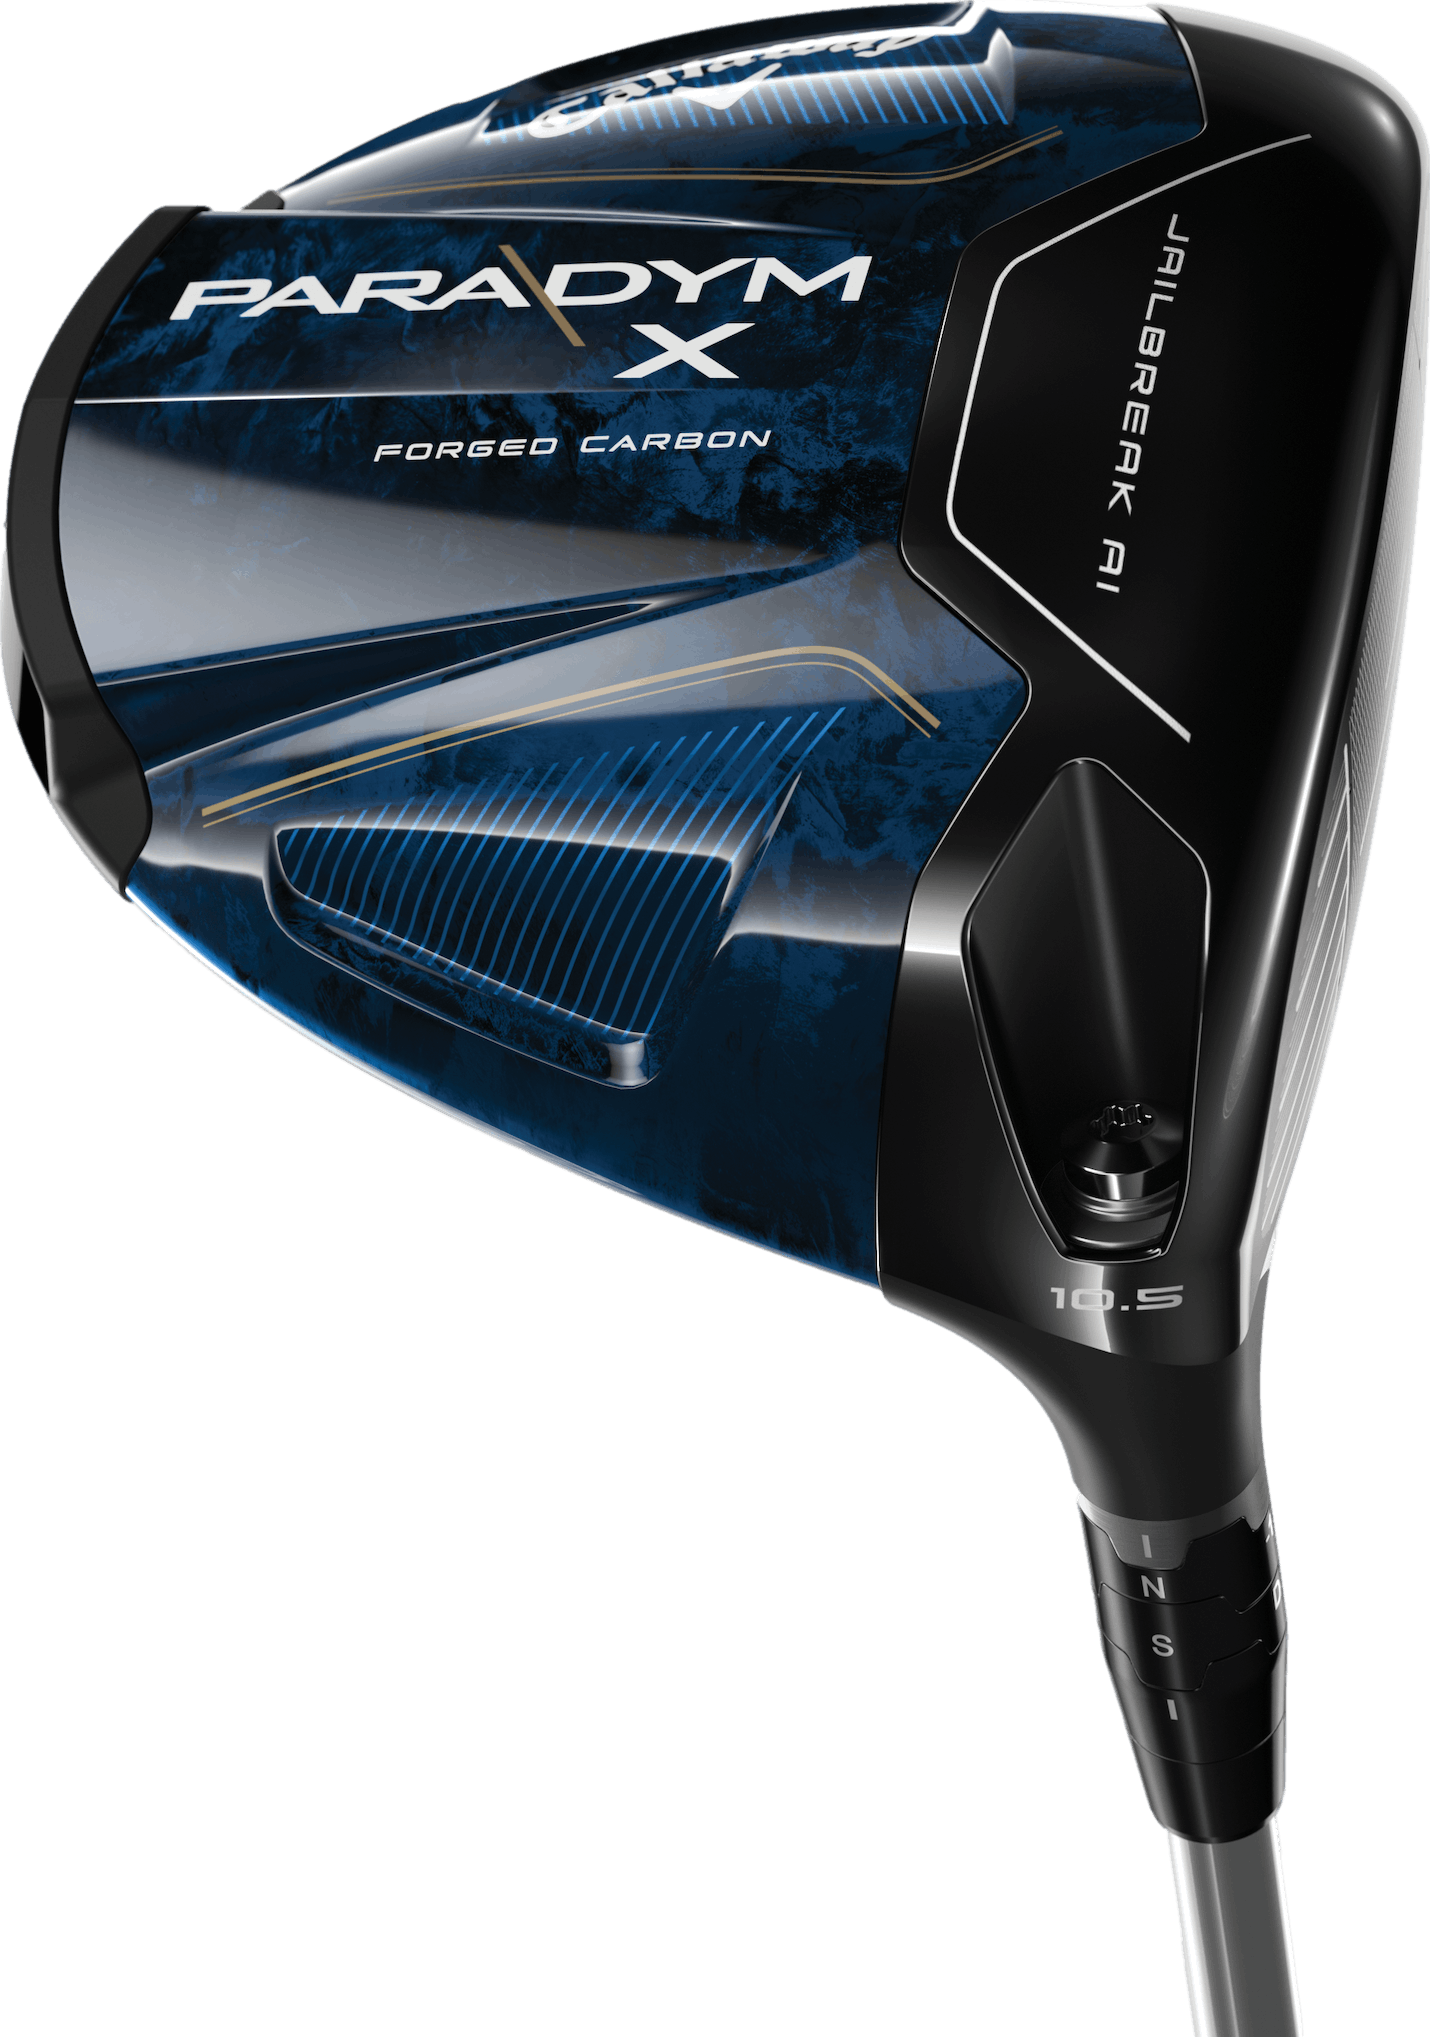 Taming the Driver Slice: Expert Recommendations for the Best Anti